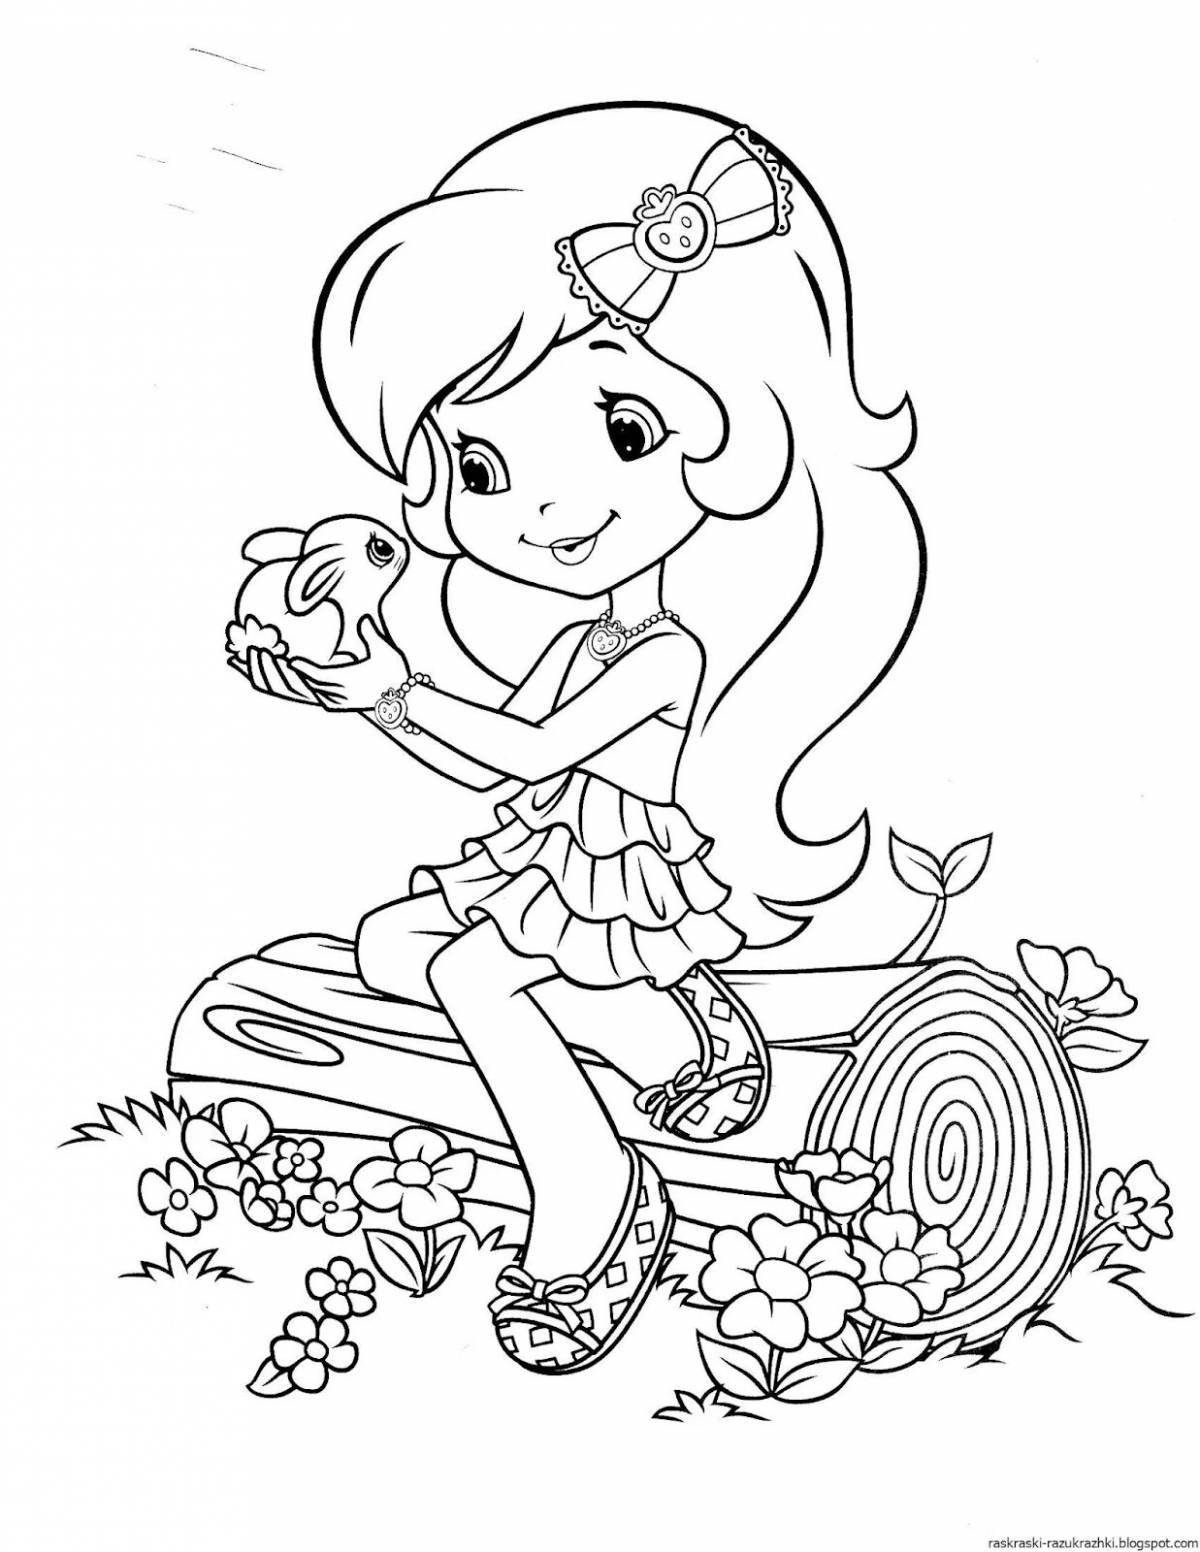 Coloring book for girls 5-6 years old